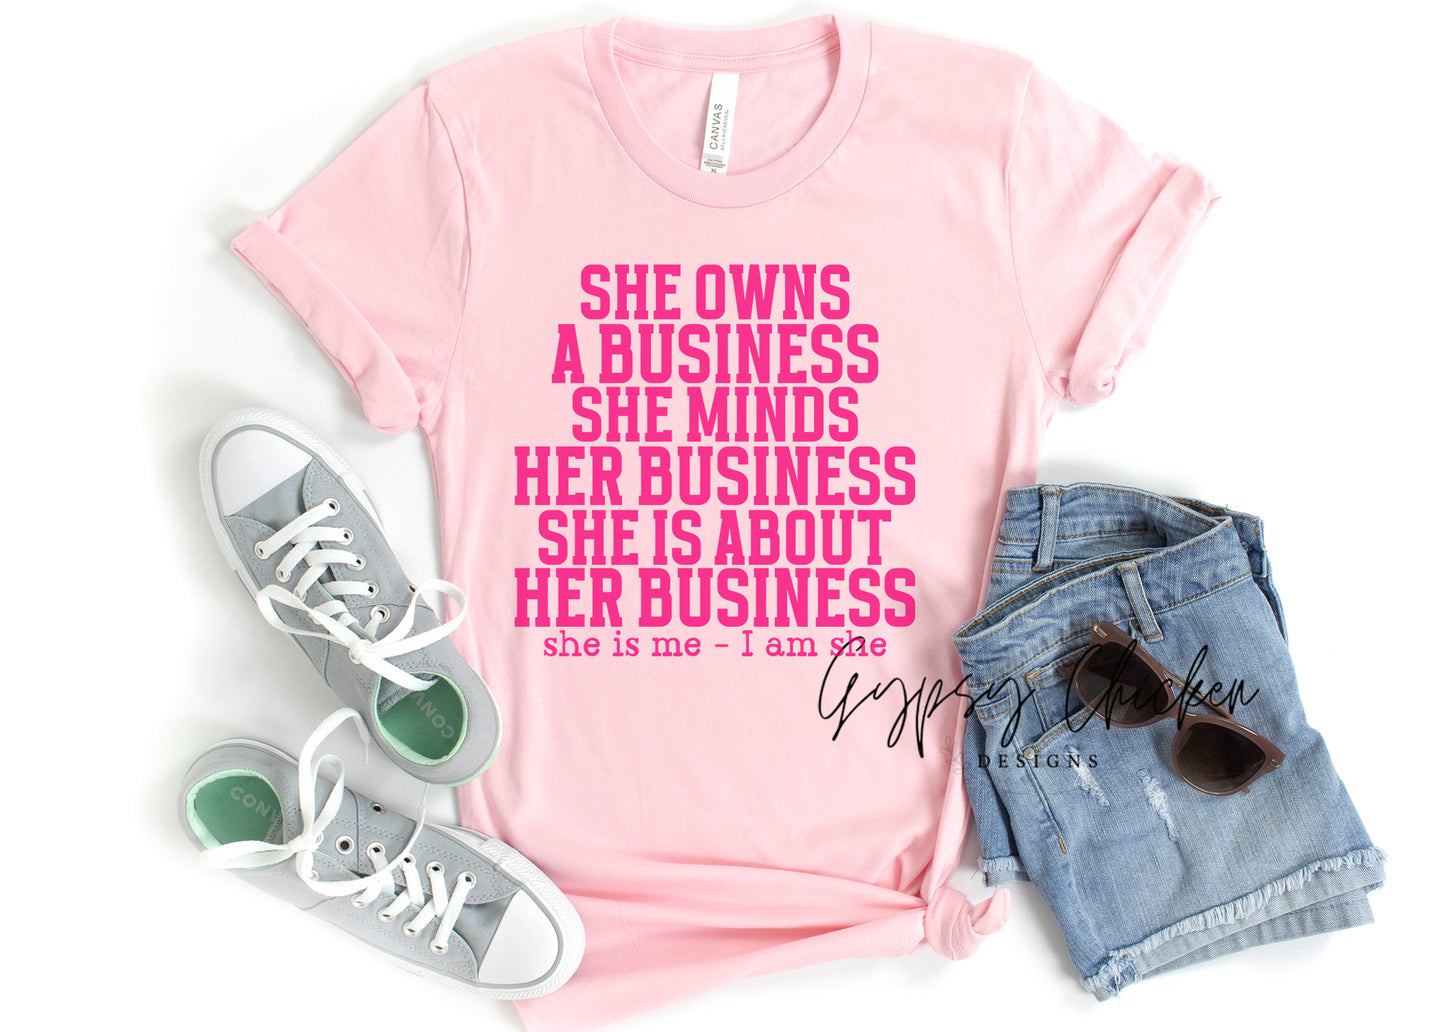 She Owns a Business...